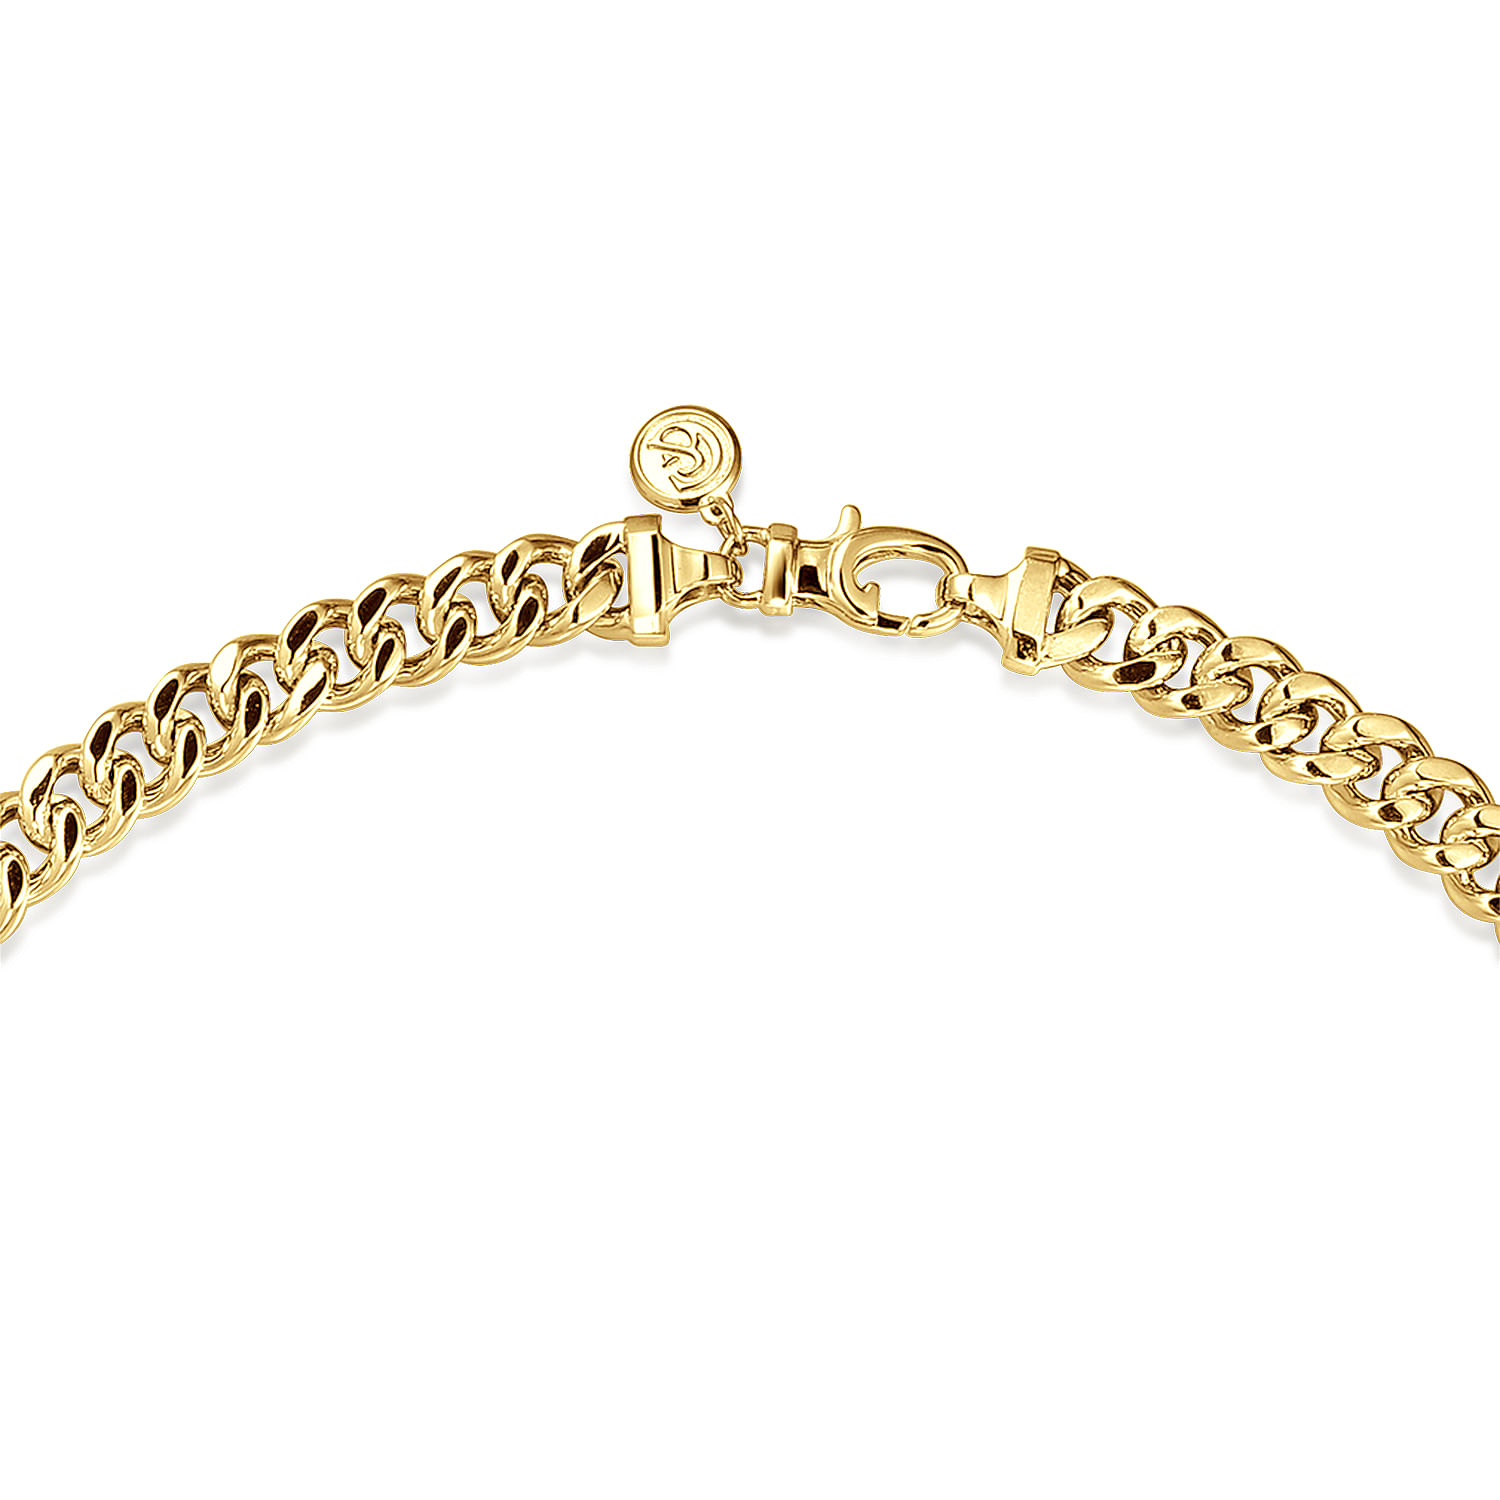 20 Inch 7mm 14K Yellow Gold Solid Men's Diamond Cut Chain Link Necklace